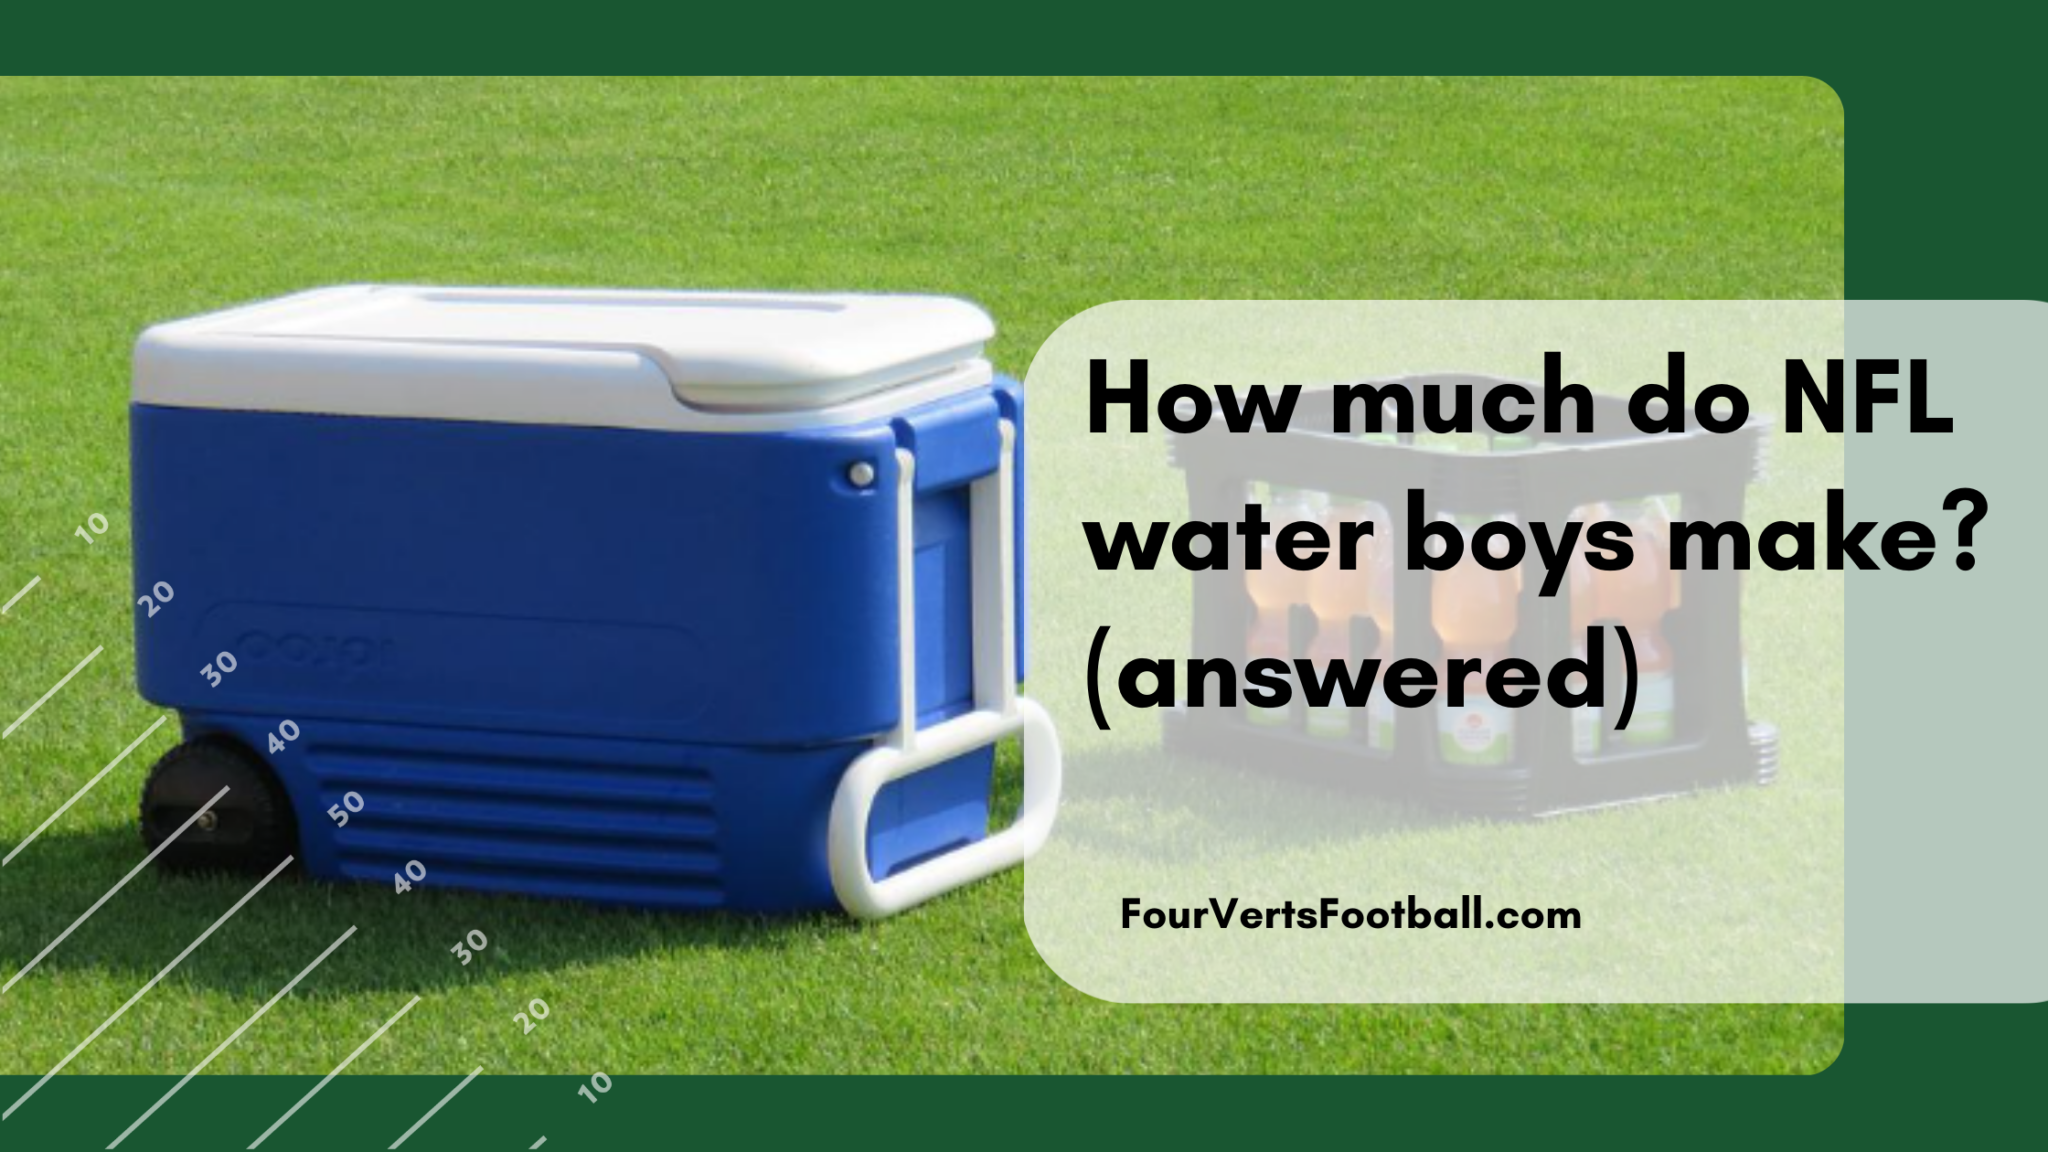 How much do NFL waterboys make? - Four Verts Football